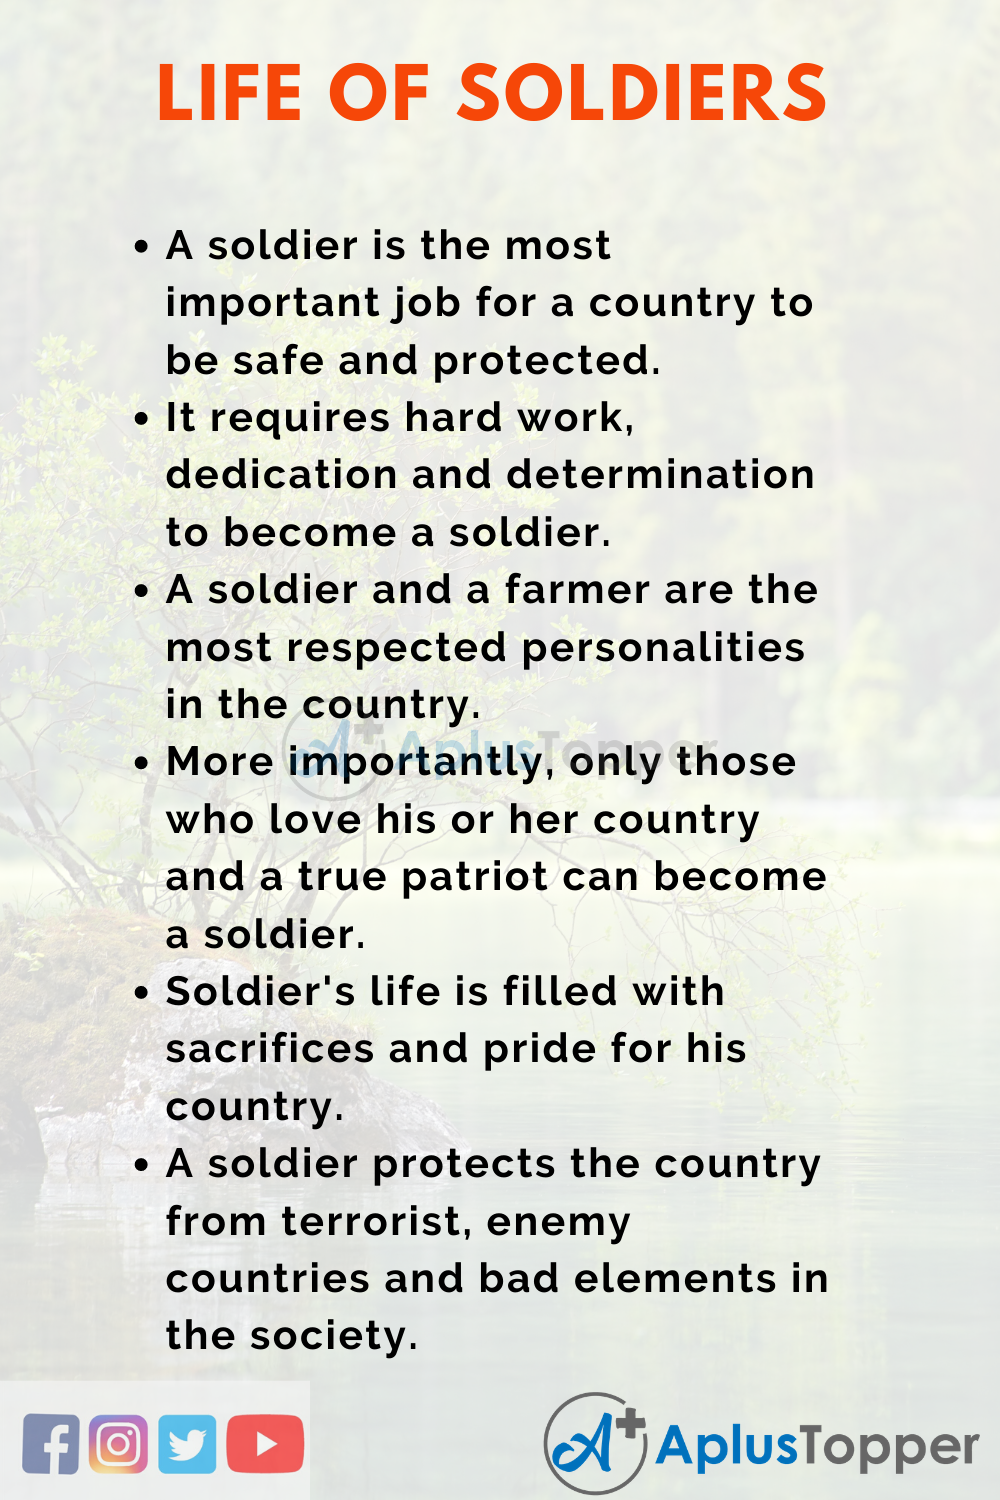 500 word essay on being a professional soldier